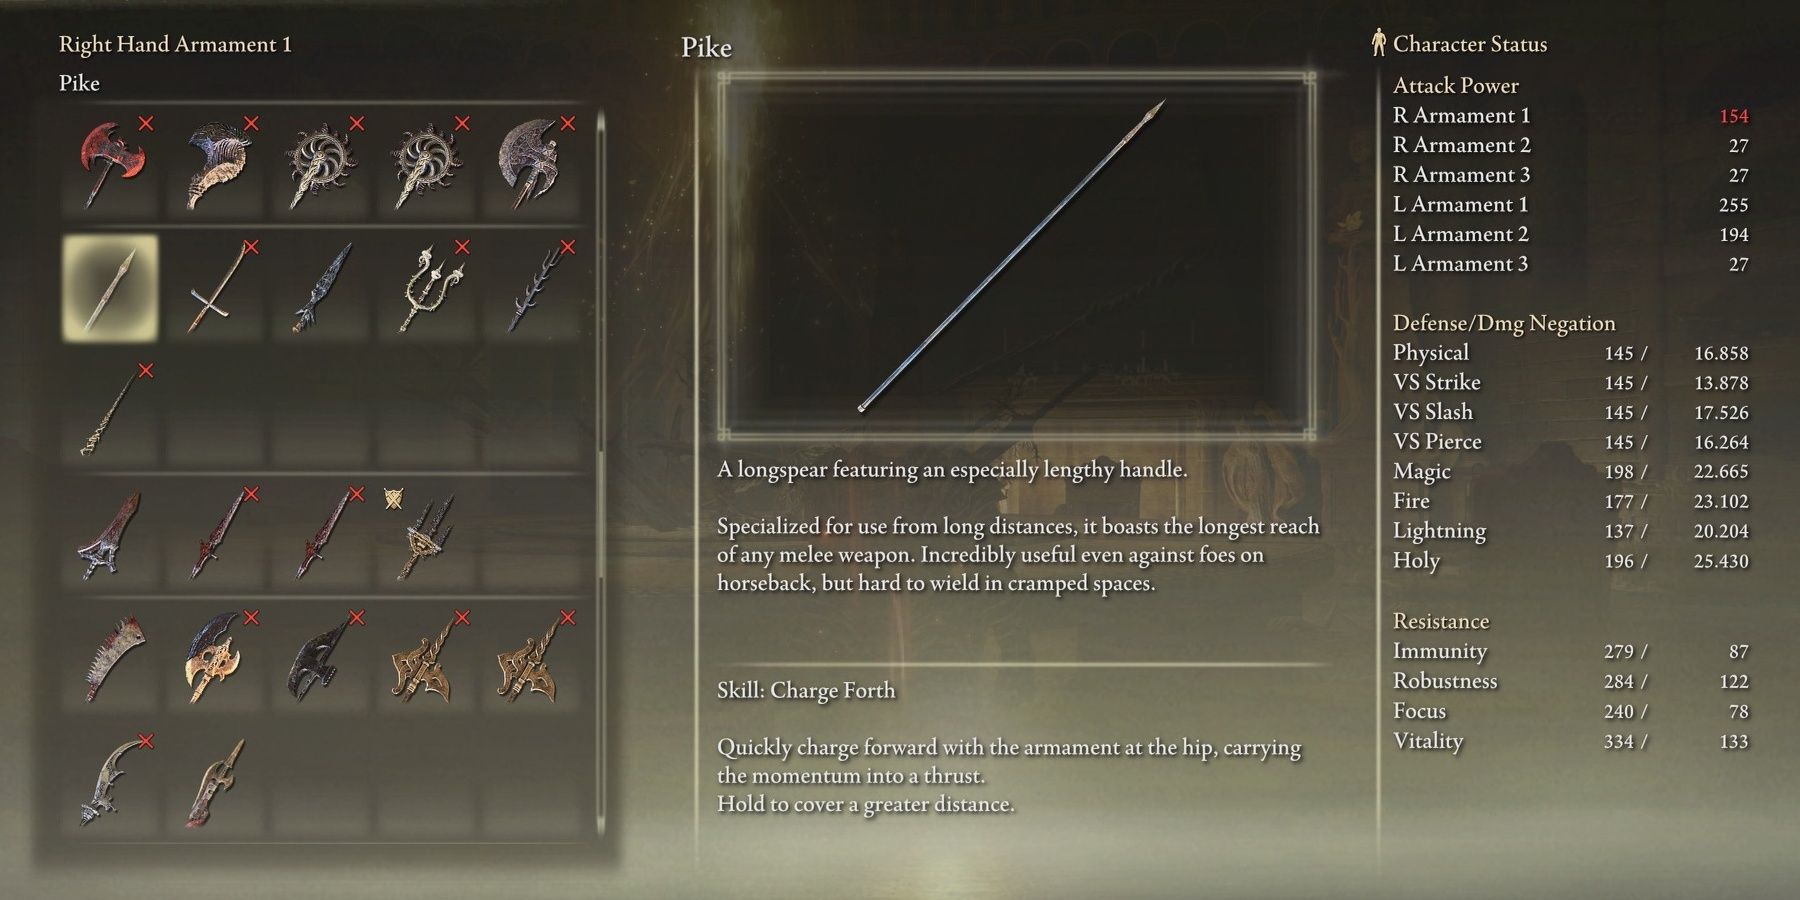 The Pike spear and its stats in the menu in Elden Ring.